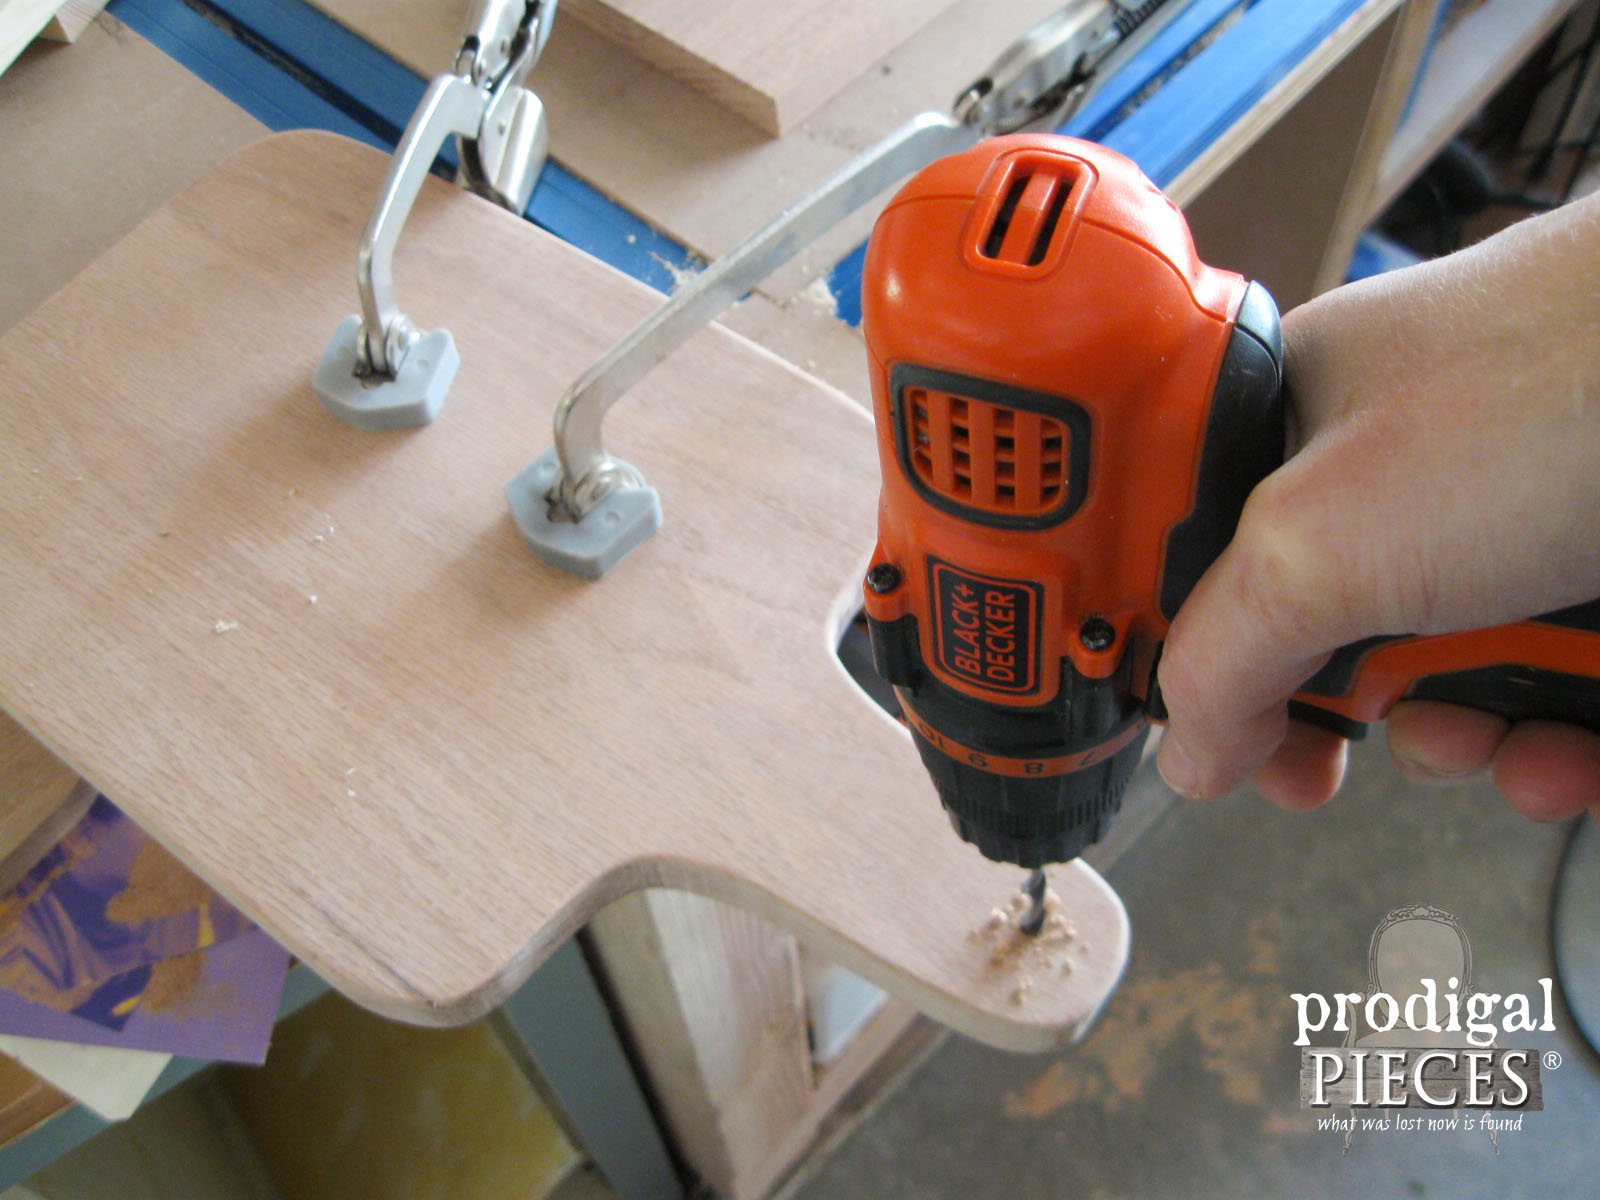 Drilling Cutting Board Handle | Prodigal Pieces | www.prodigalpieces.com